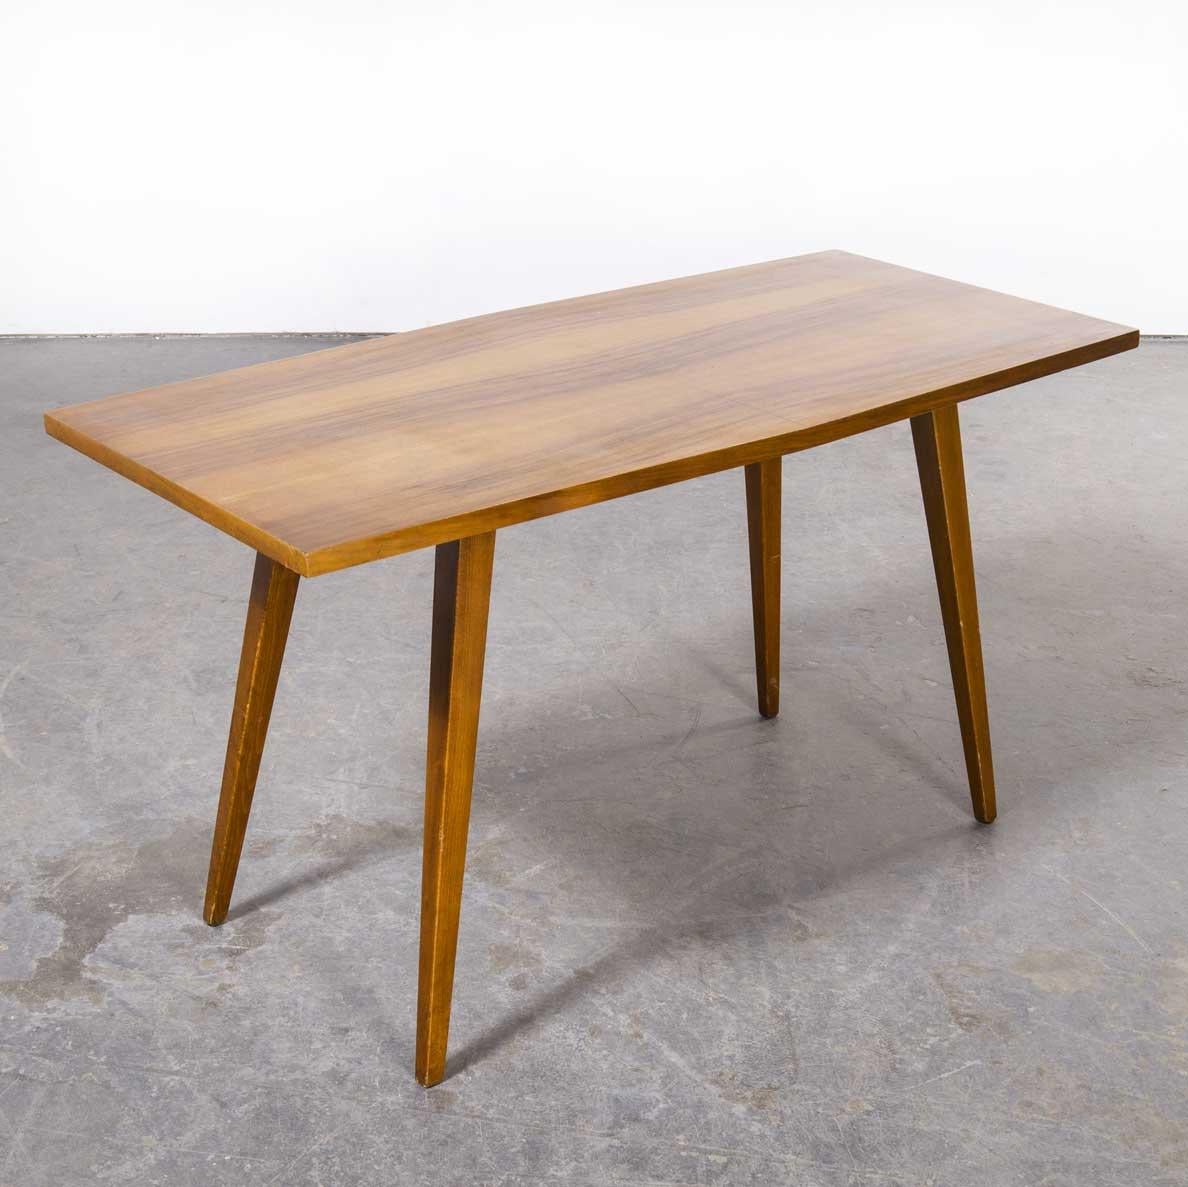 1950’s Low Occasional Side Table By Tatra Pravenec
1950’s Low Occasional Side Table By Tatra Pravenec. Produced by Tatra Pravenec in the Czech Republic. Czech design will always be affiliated to the Bauhaus movement which inspired a generation of